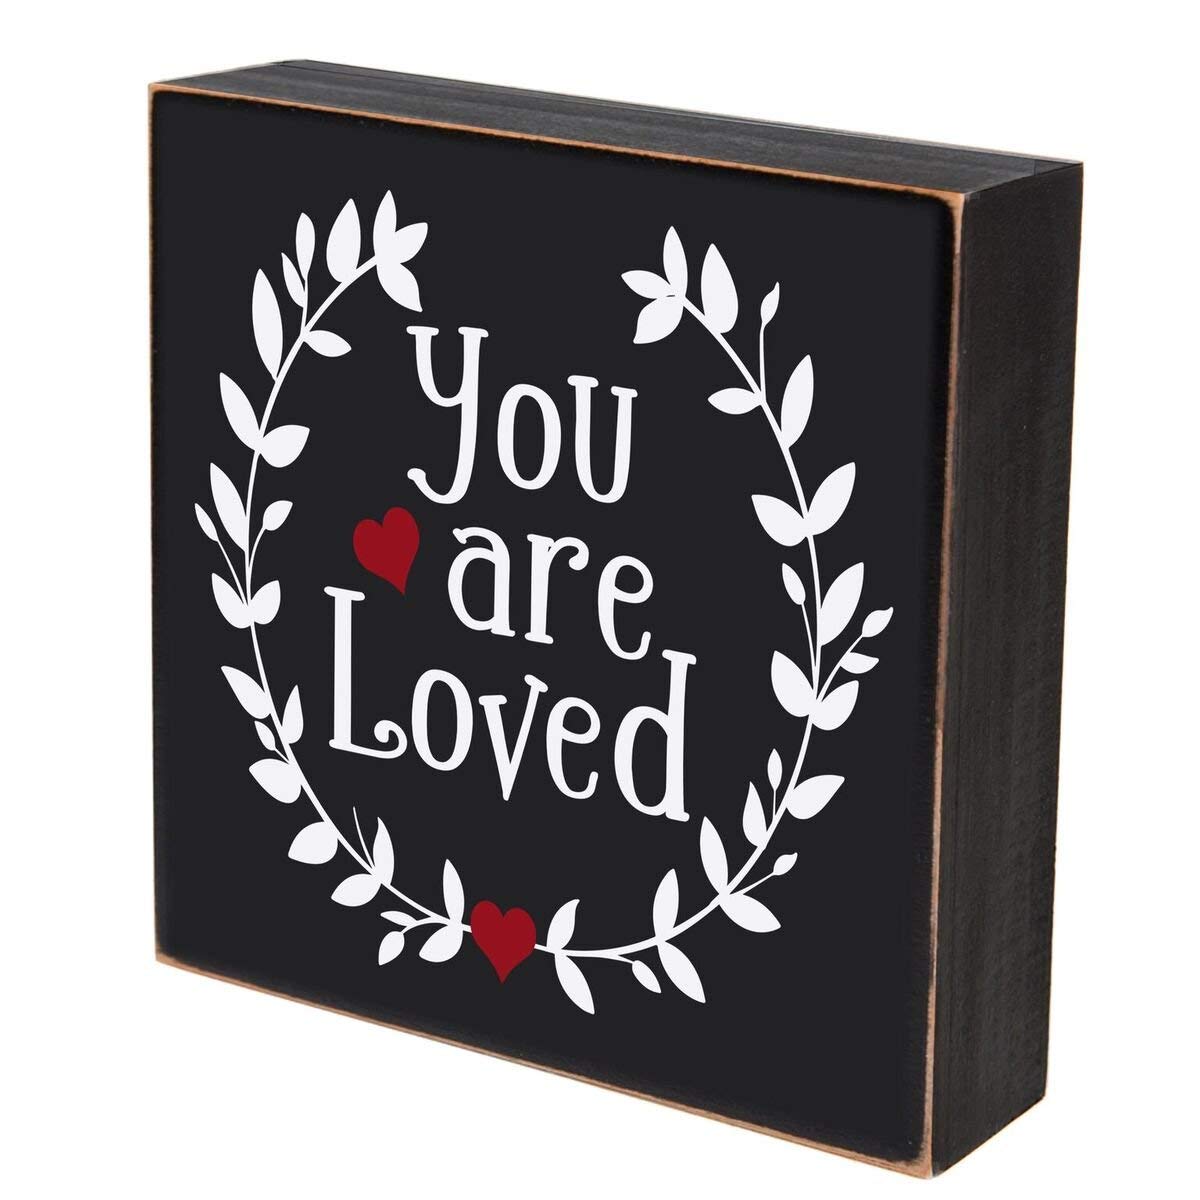 Digitally Printed Shadow Box Wall Decor - You Are Loved - LifeSong Milestones